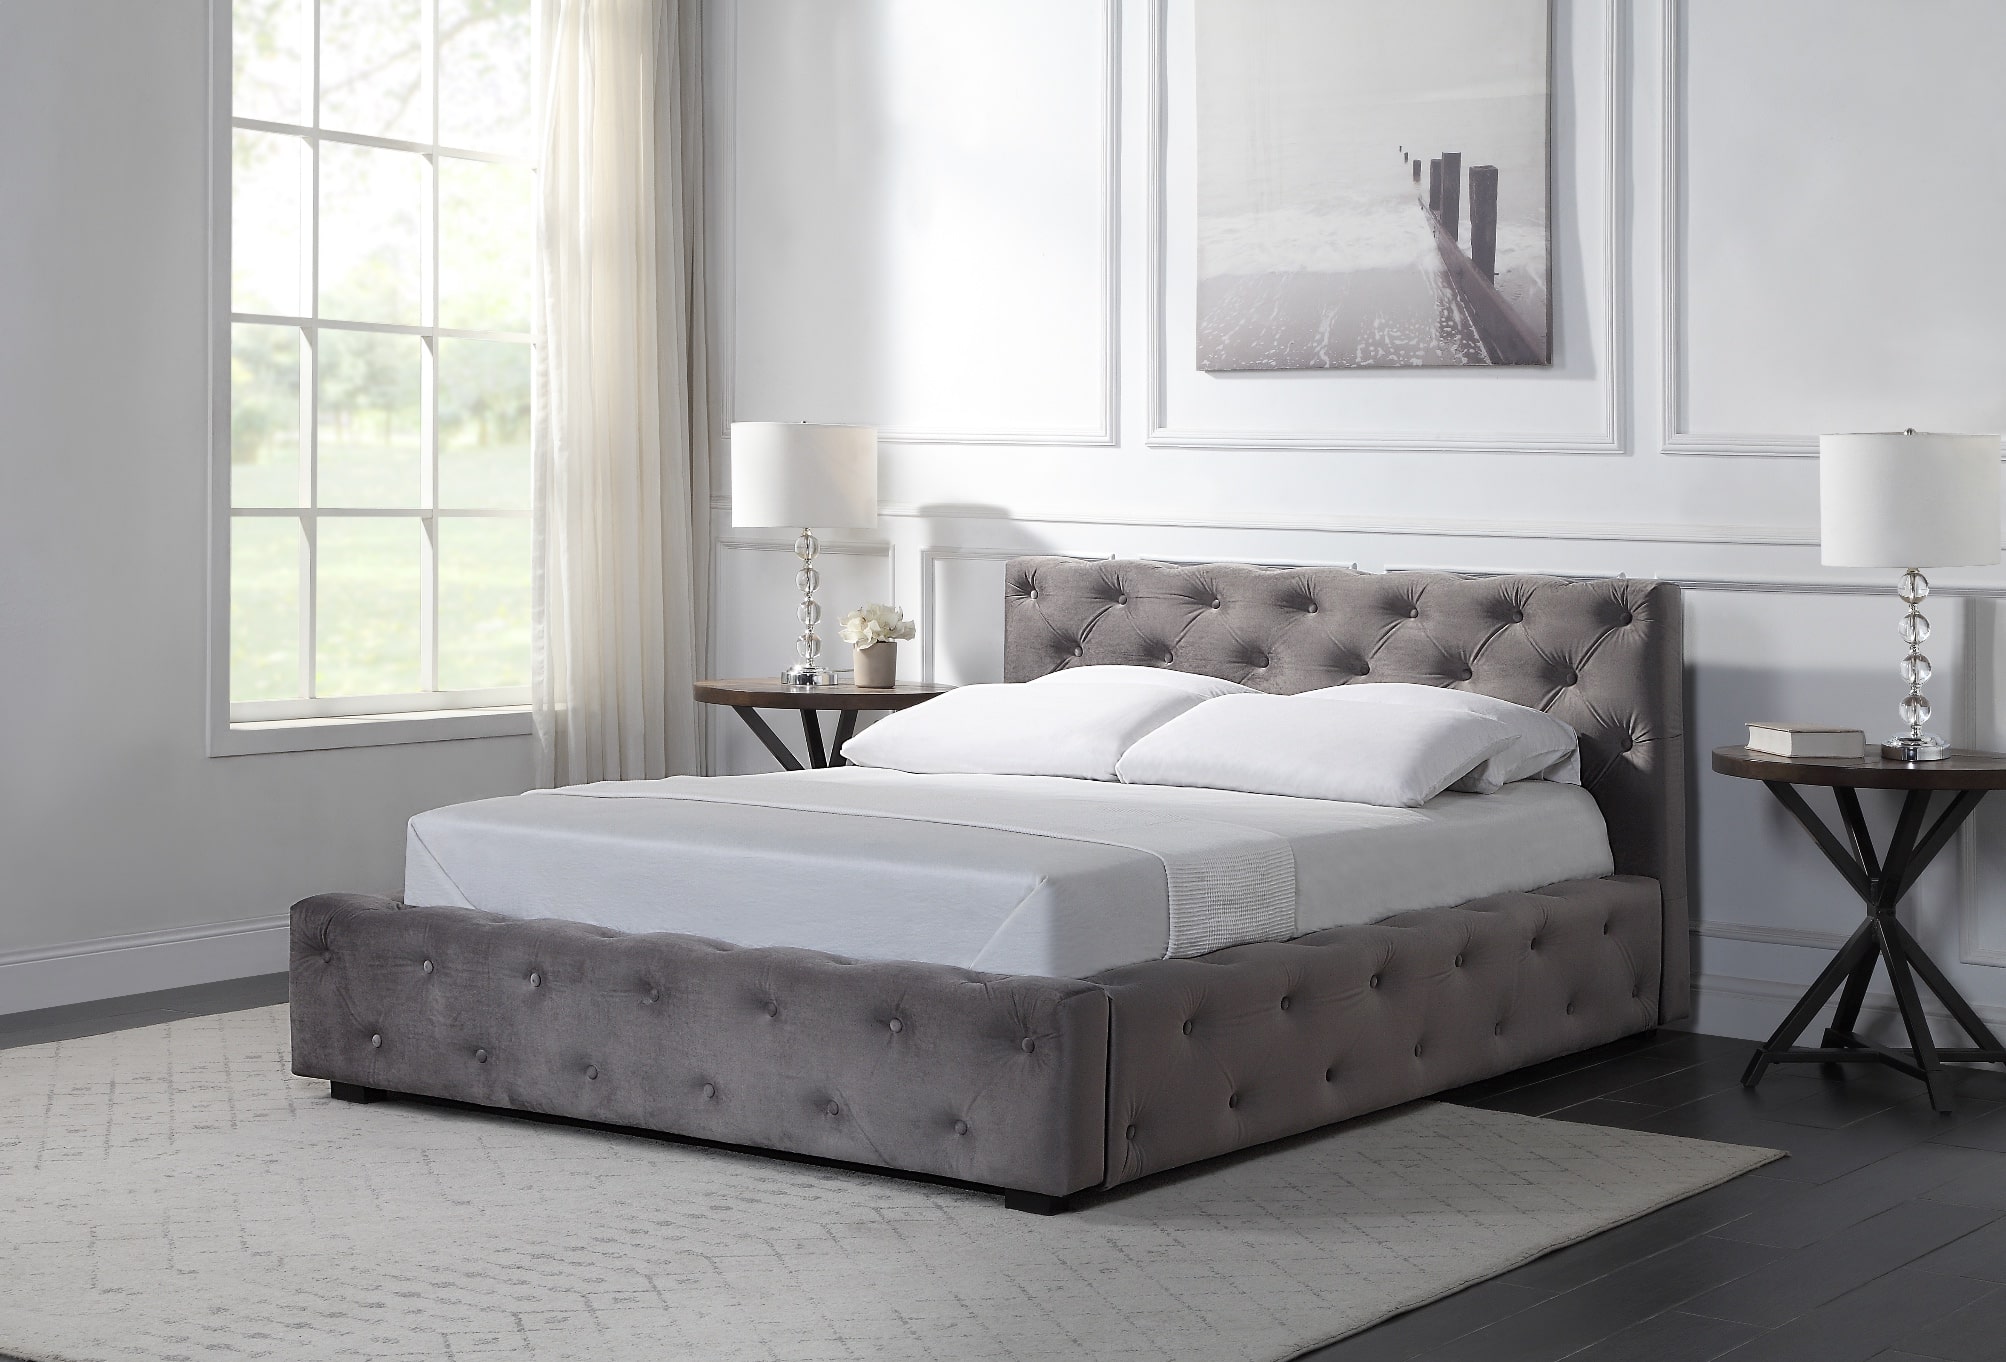 Deluxe Studded Grey Fabric Bed Frame, King Size Bed And Mattress Set